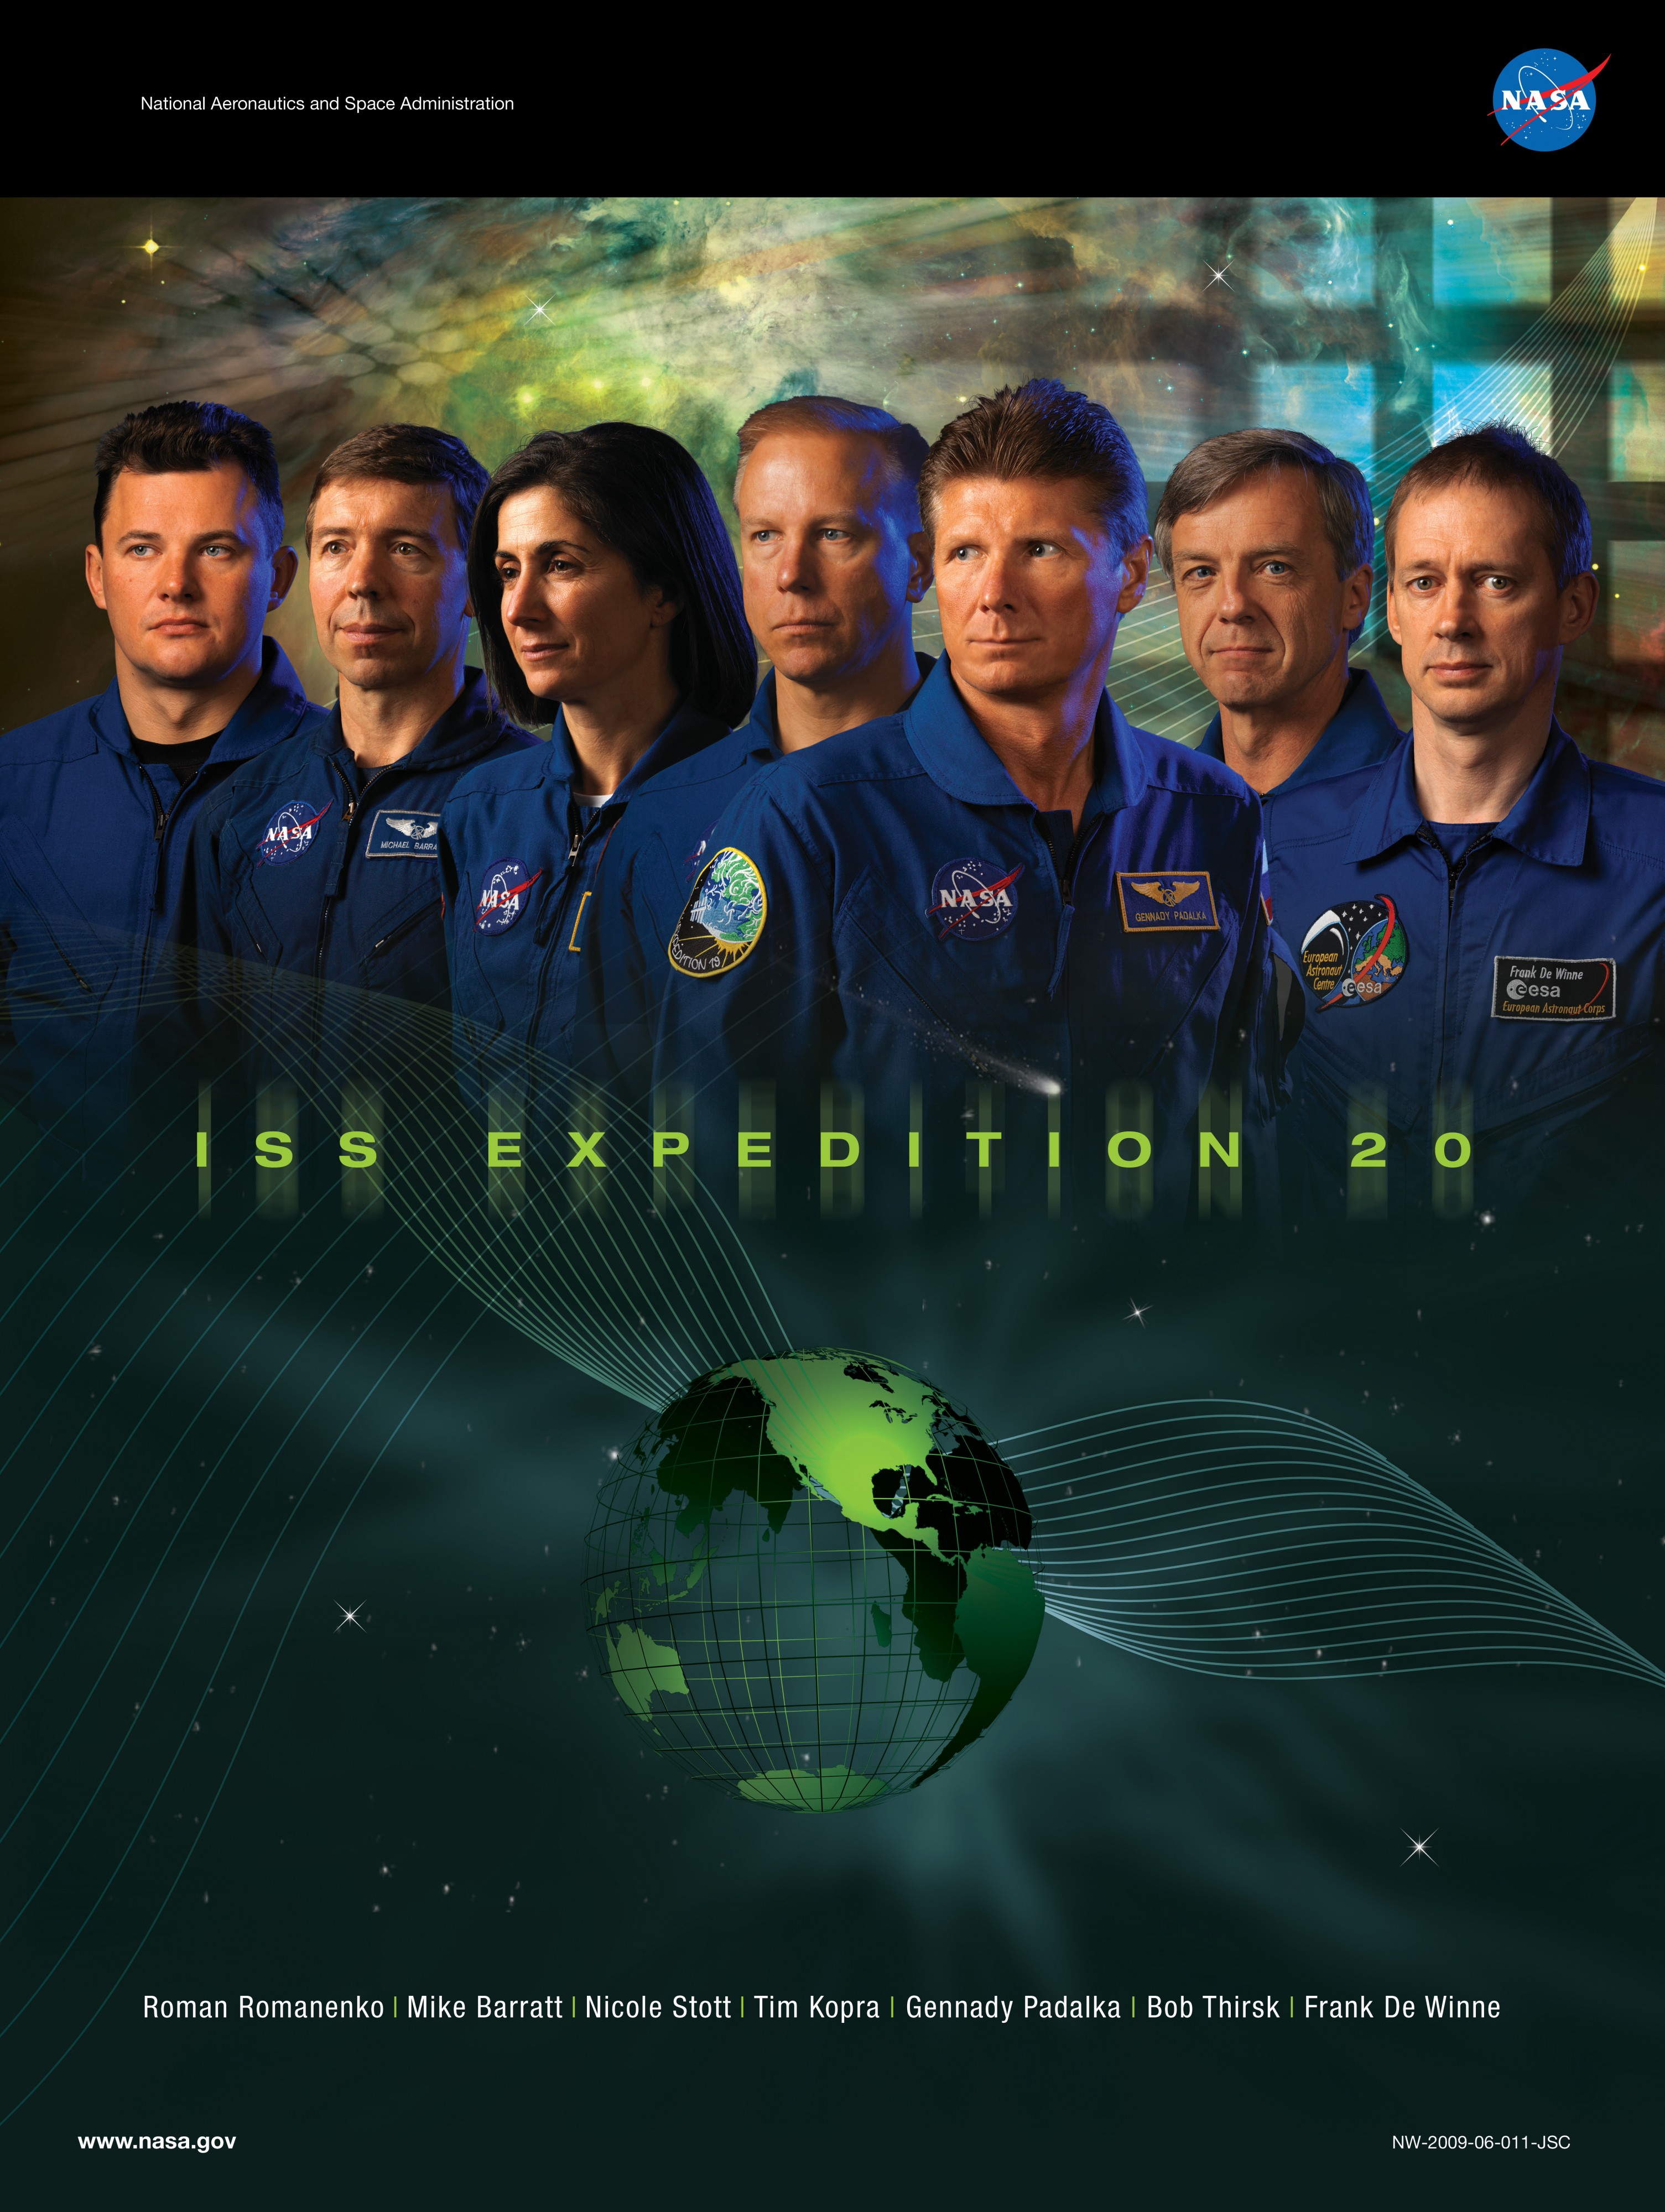 Expedition 20 crew poster